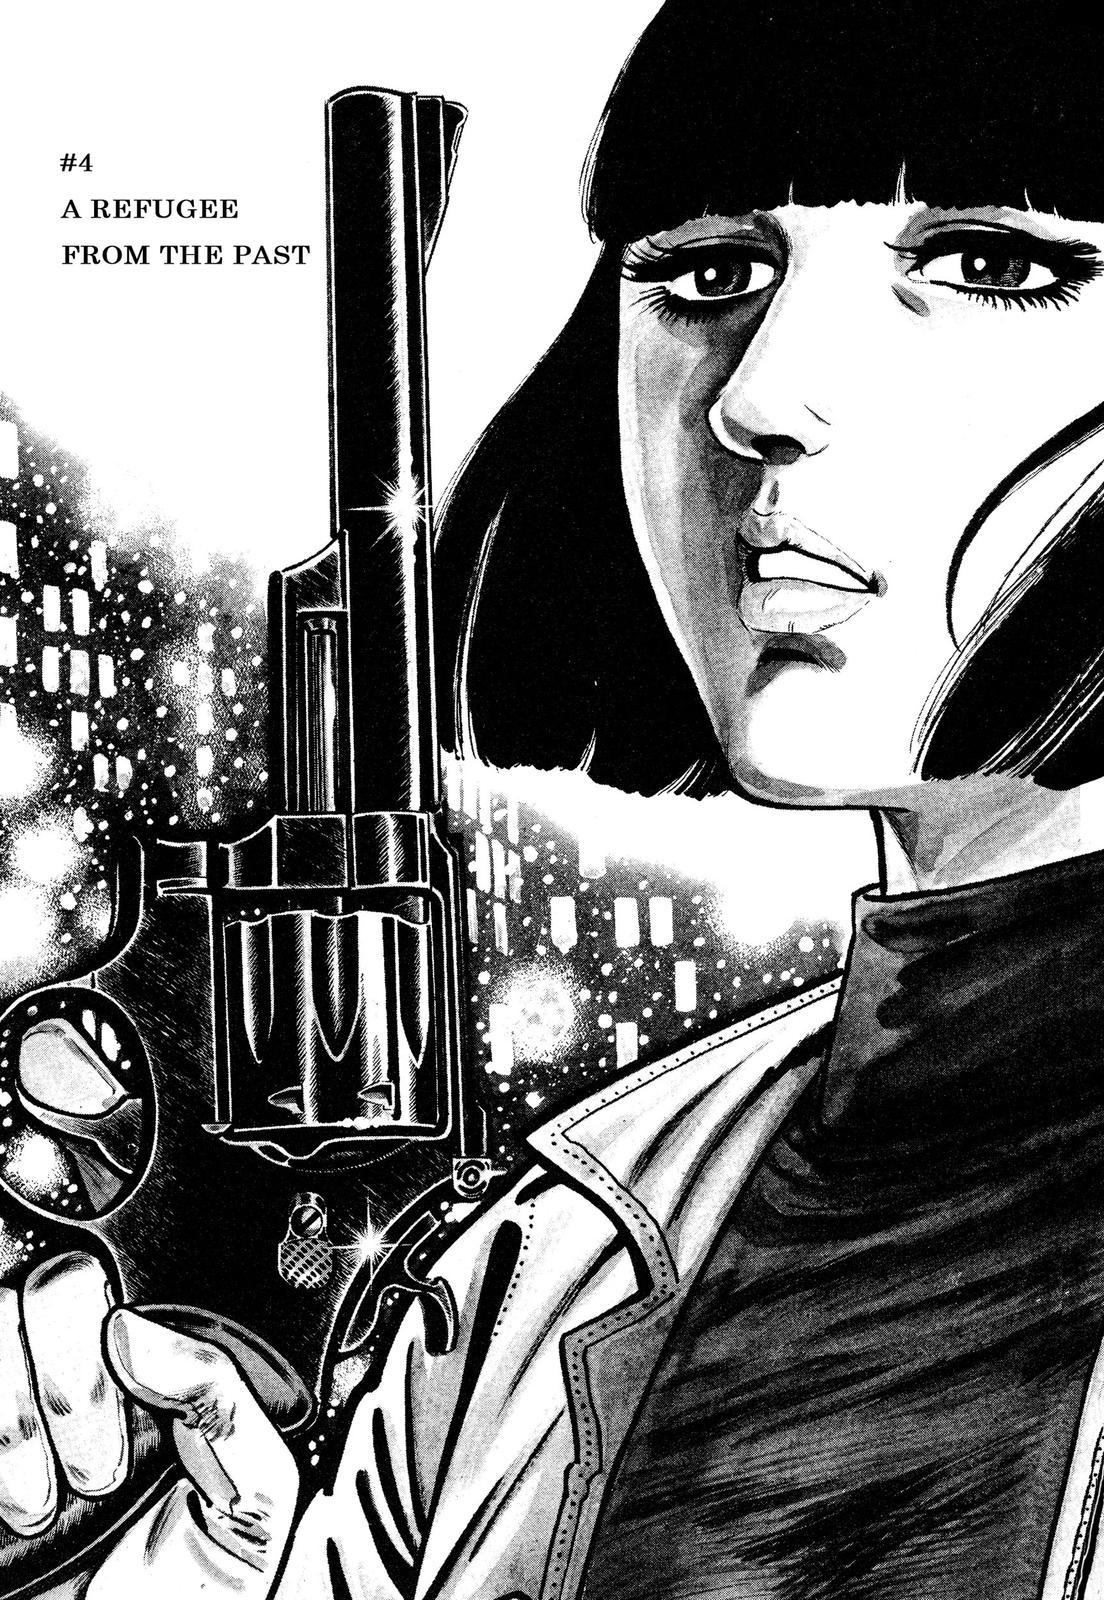 Doll: The Hotel Detective Vol. 1 Ch. 4 A Refugee from the Past